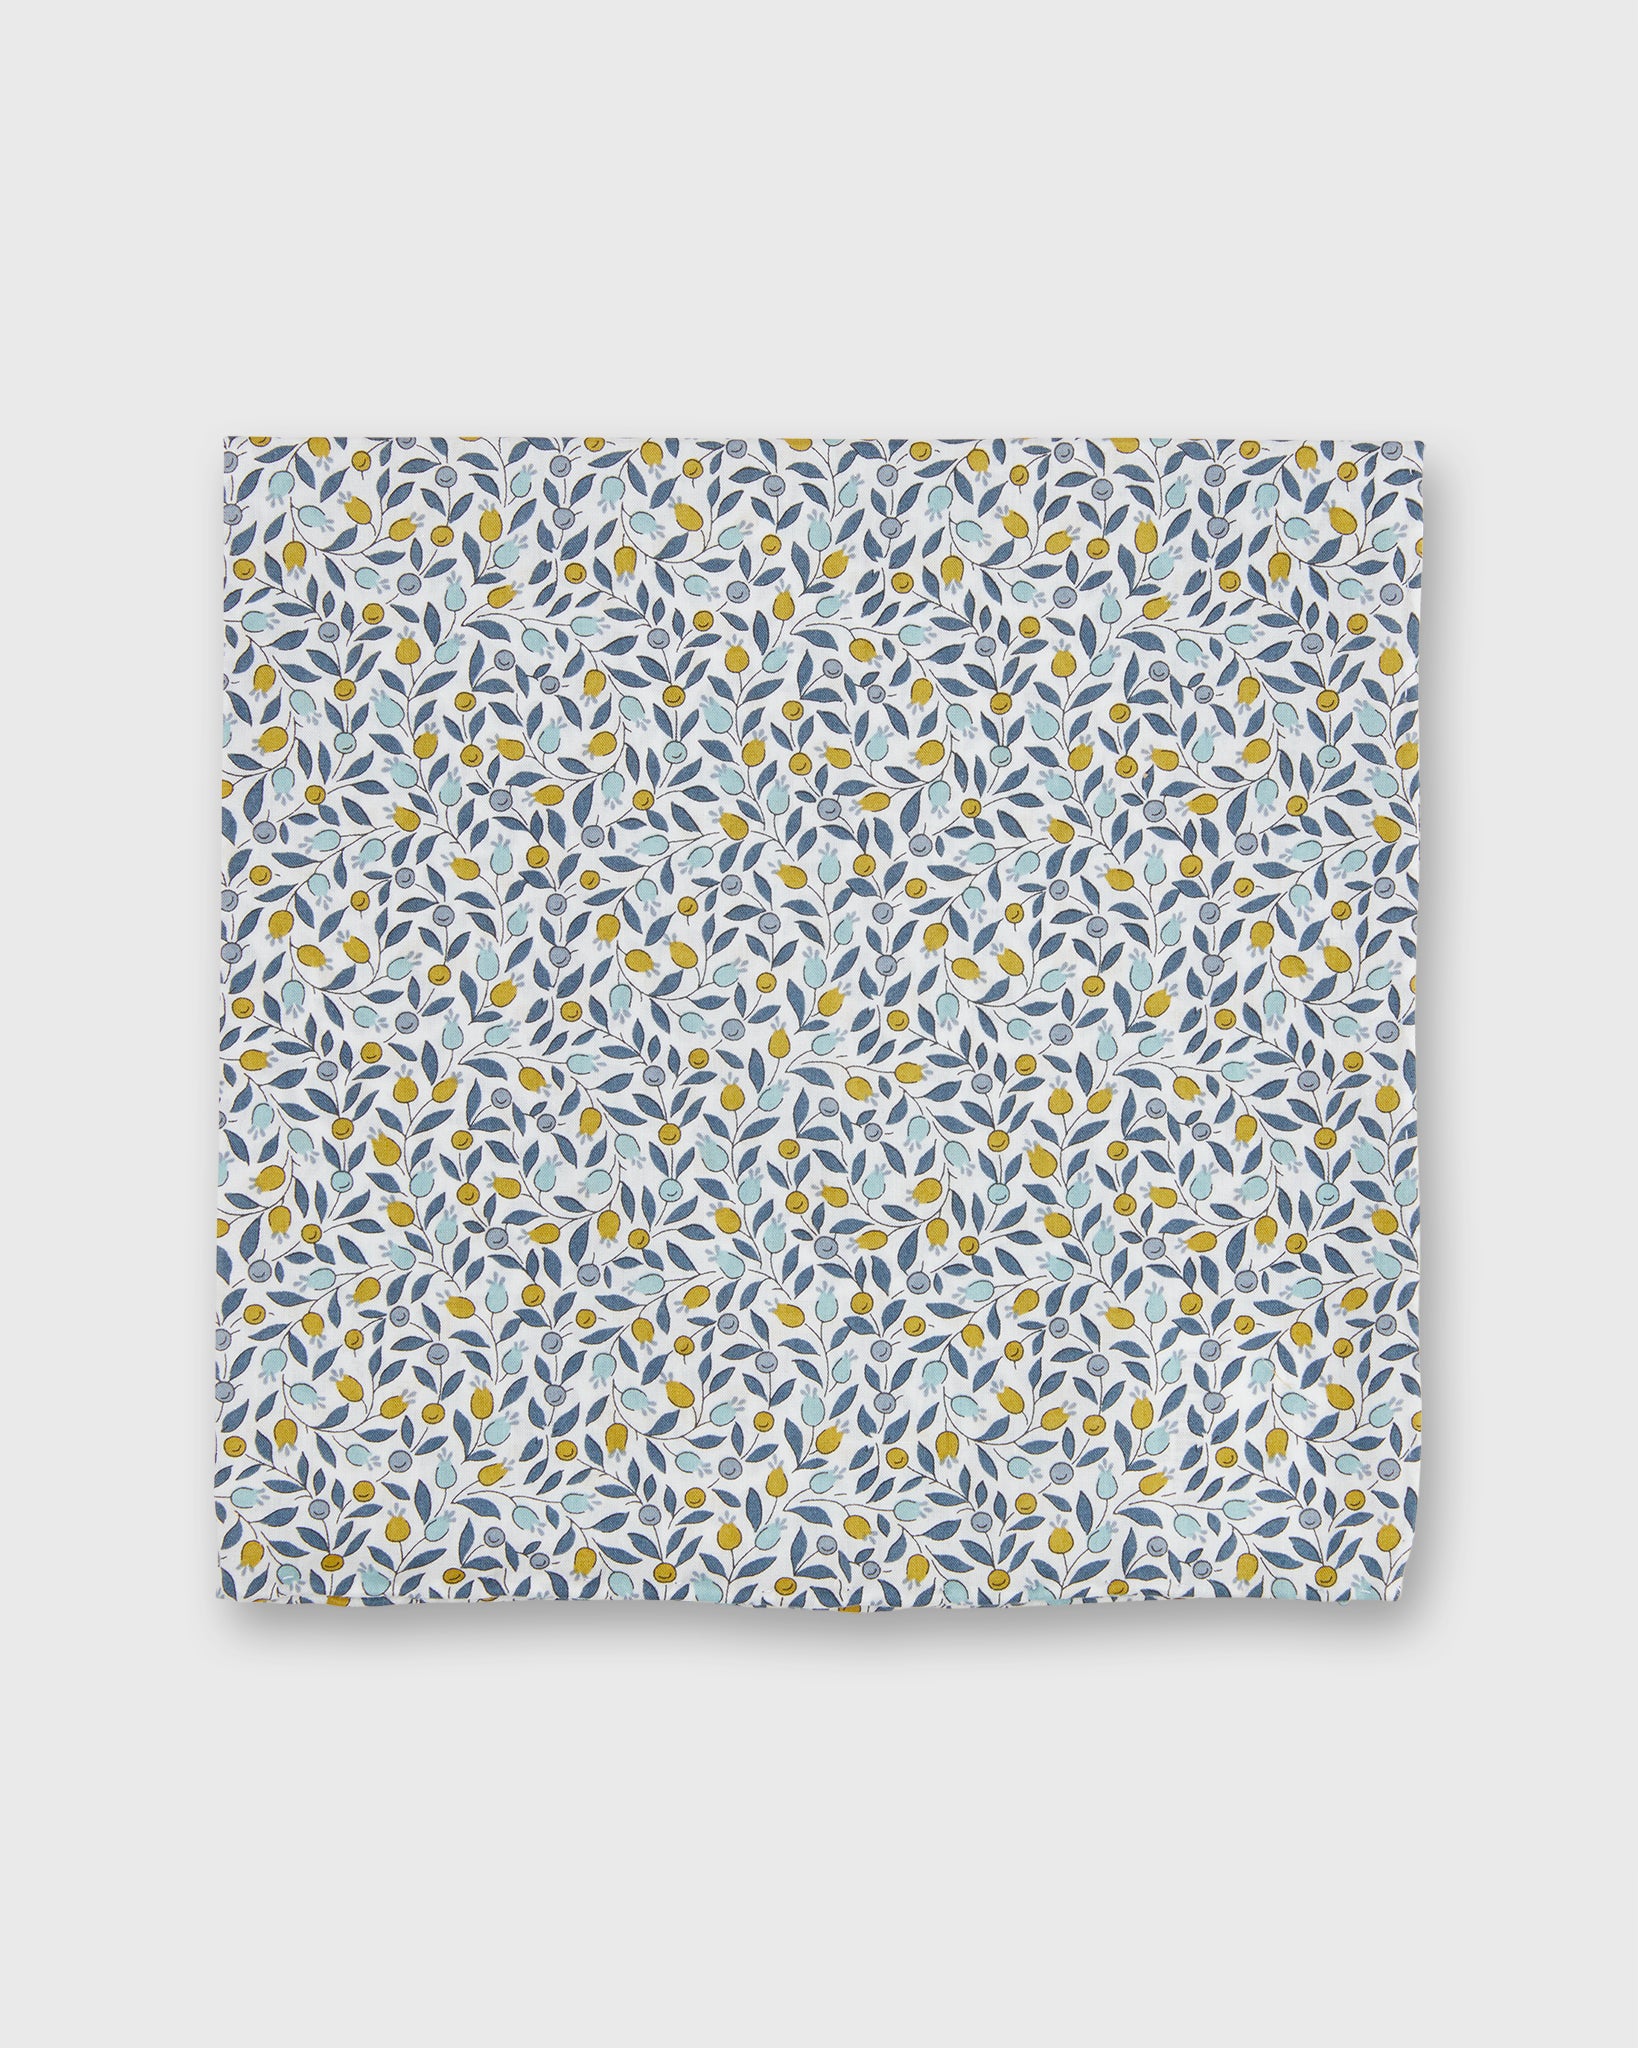 Cotton Print Pocket Square in Blue/Yellow Floriana Liberty Fabric